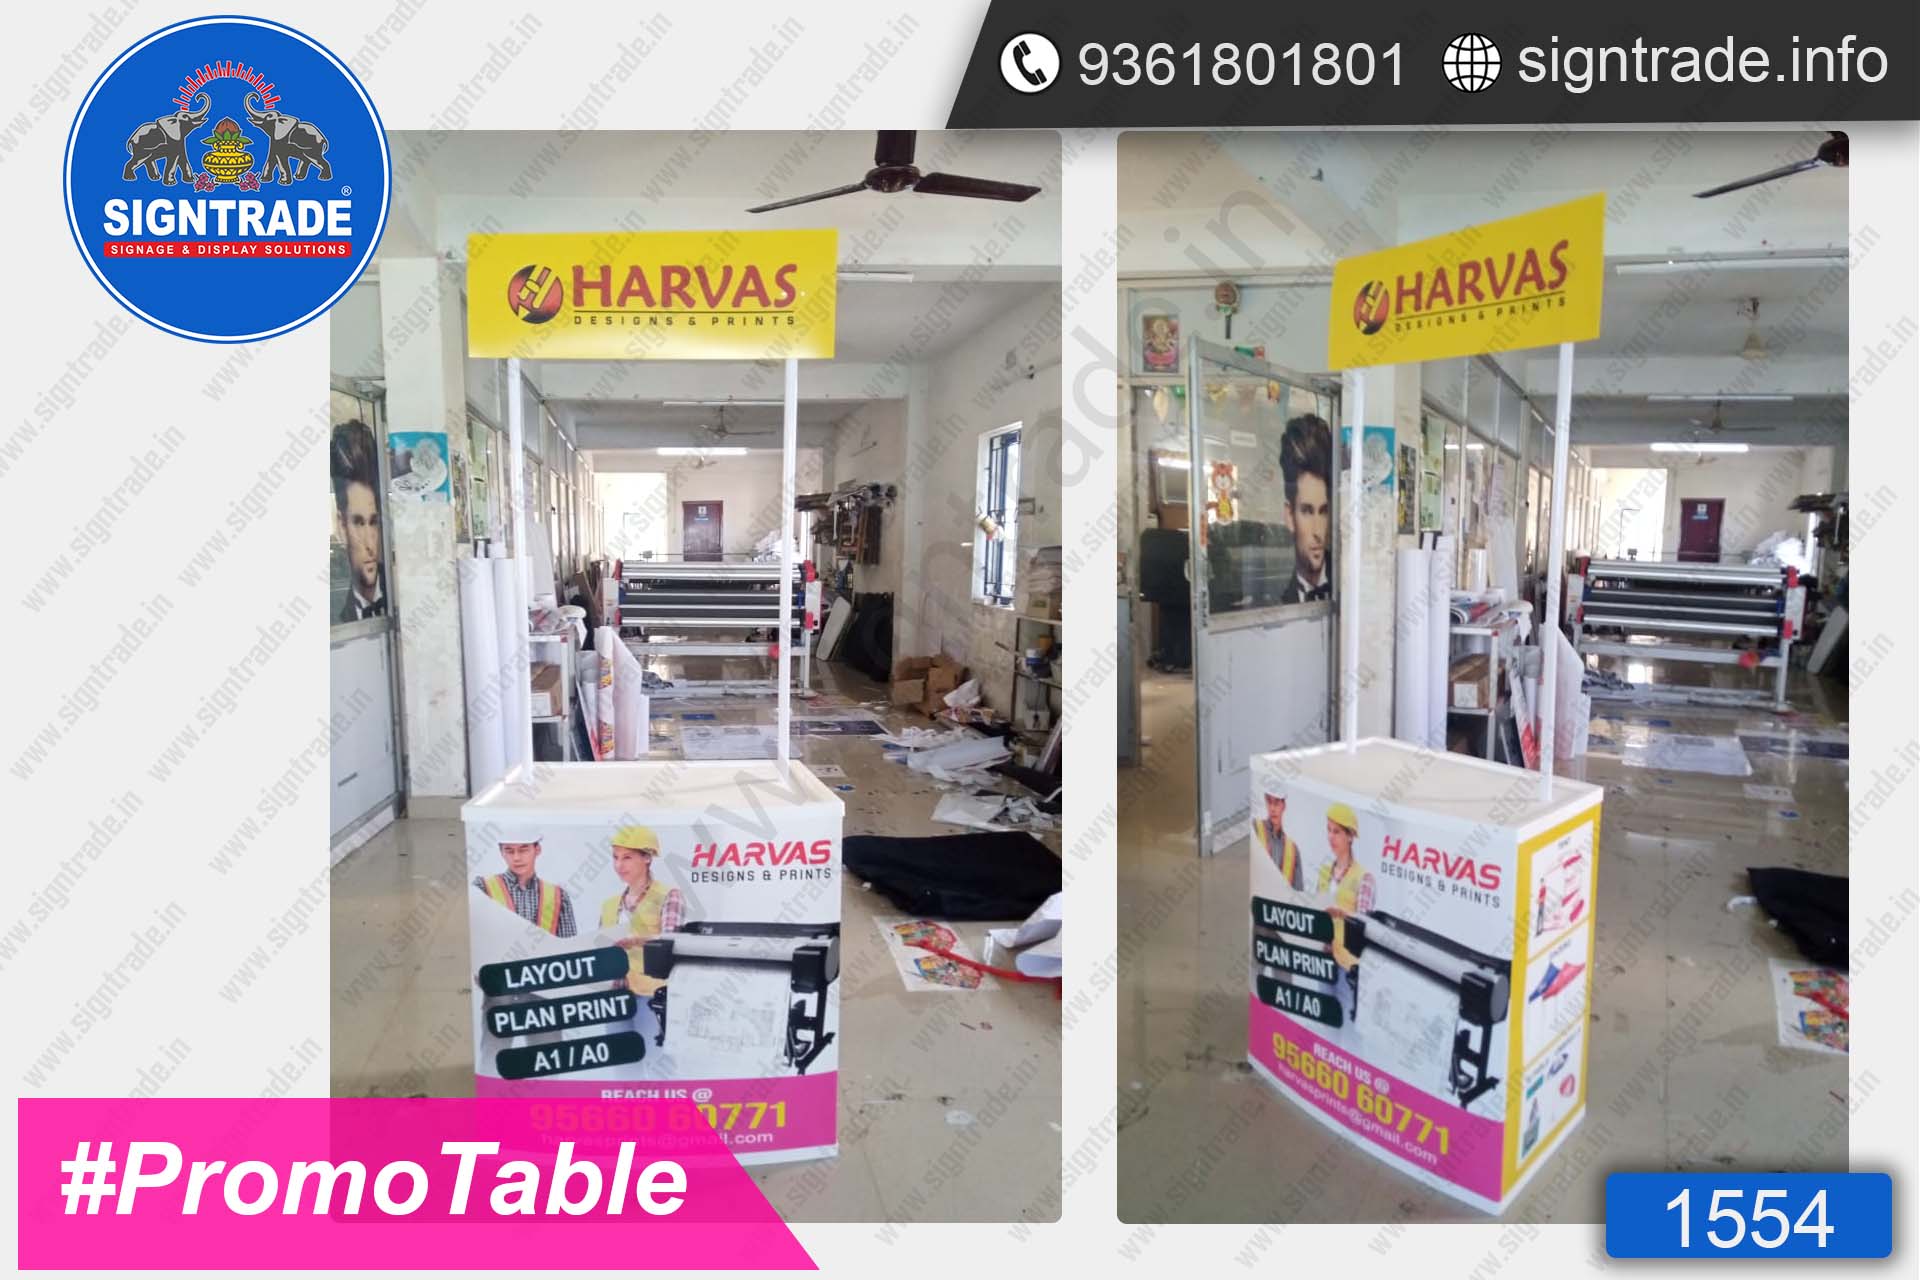 Harvas Designs & Prints - SIGNTRADE - Promotional Table Manufactures in Chennai